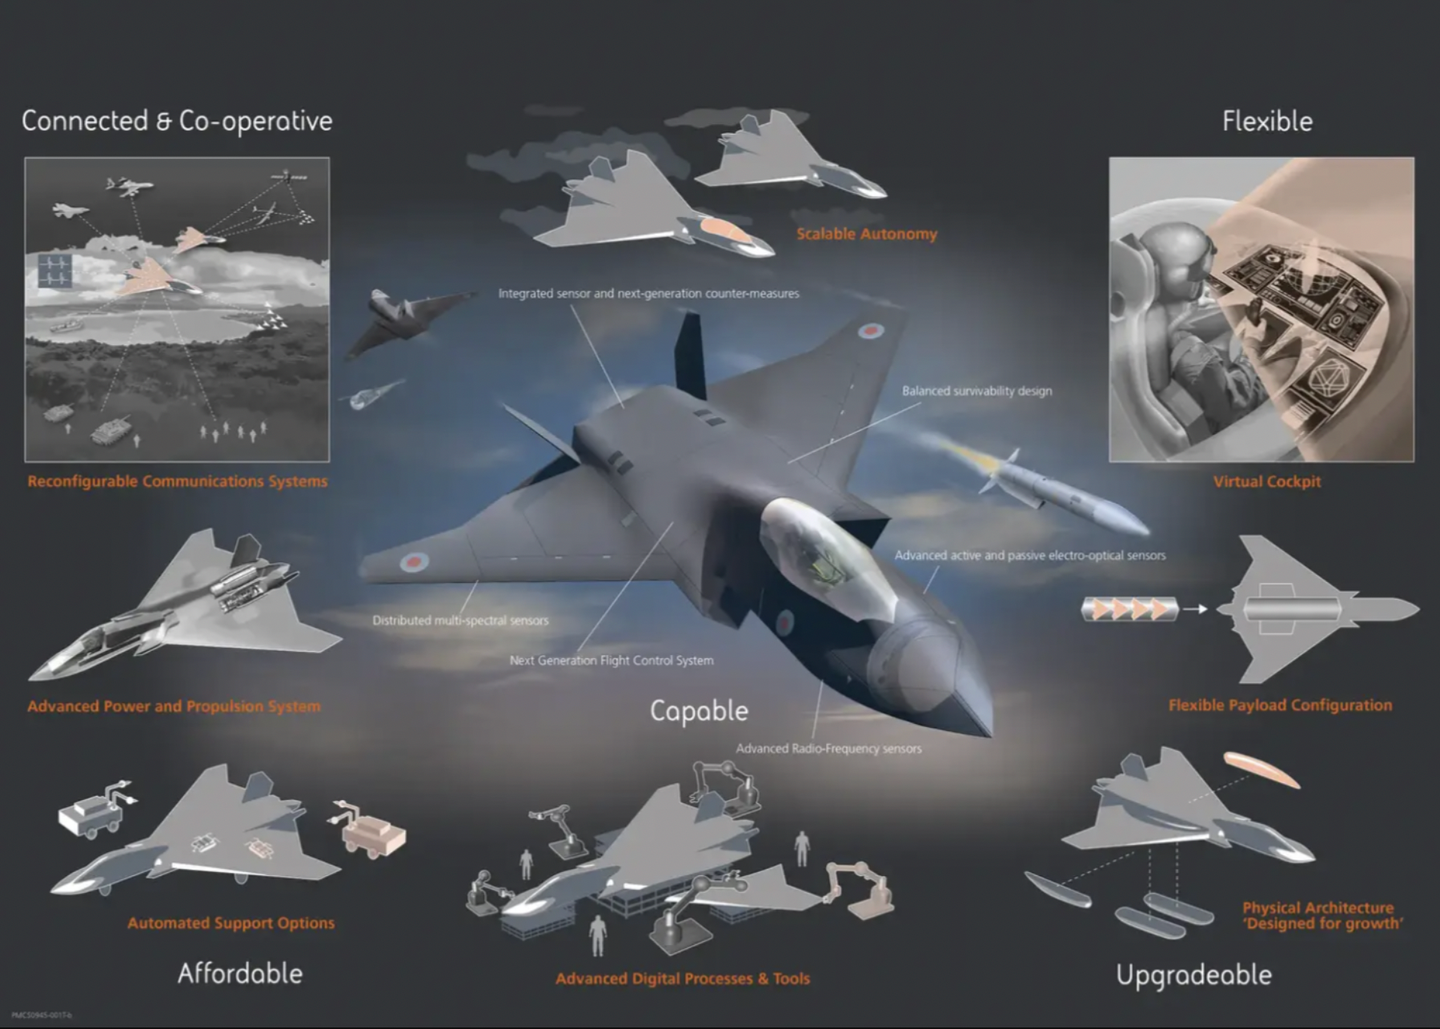 An infographic showing some of the capabilities and concepts behind the Tempest program.&nbsp;<em>BAE Systems</em>